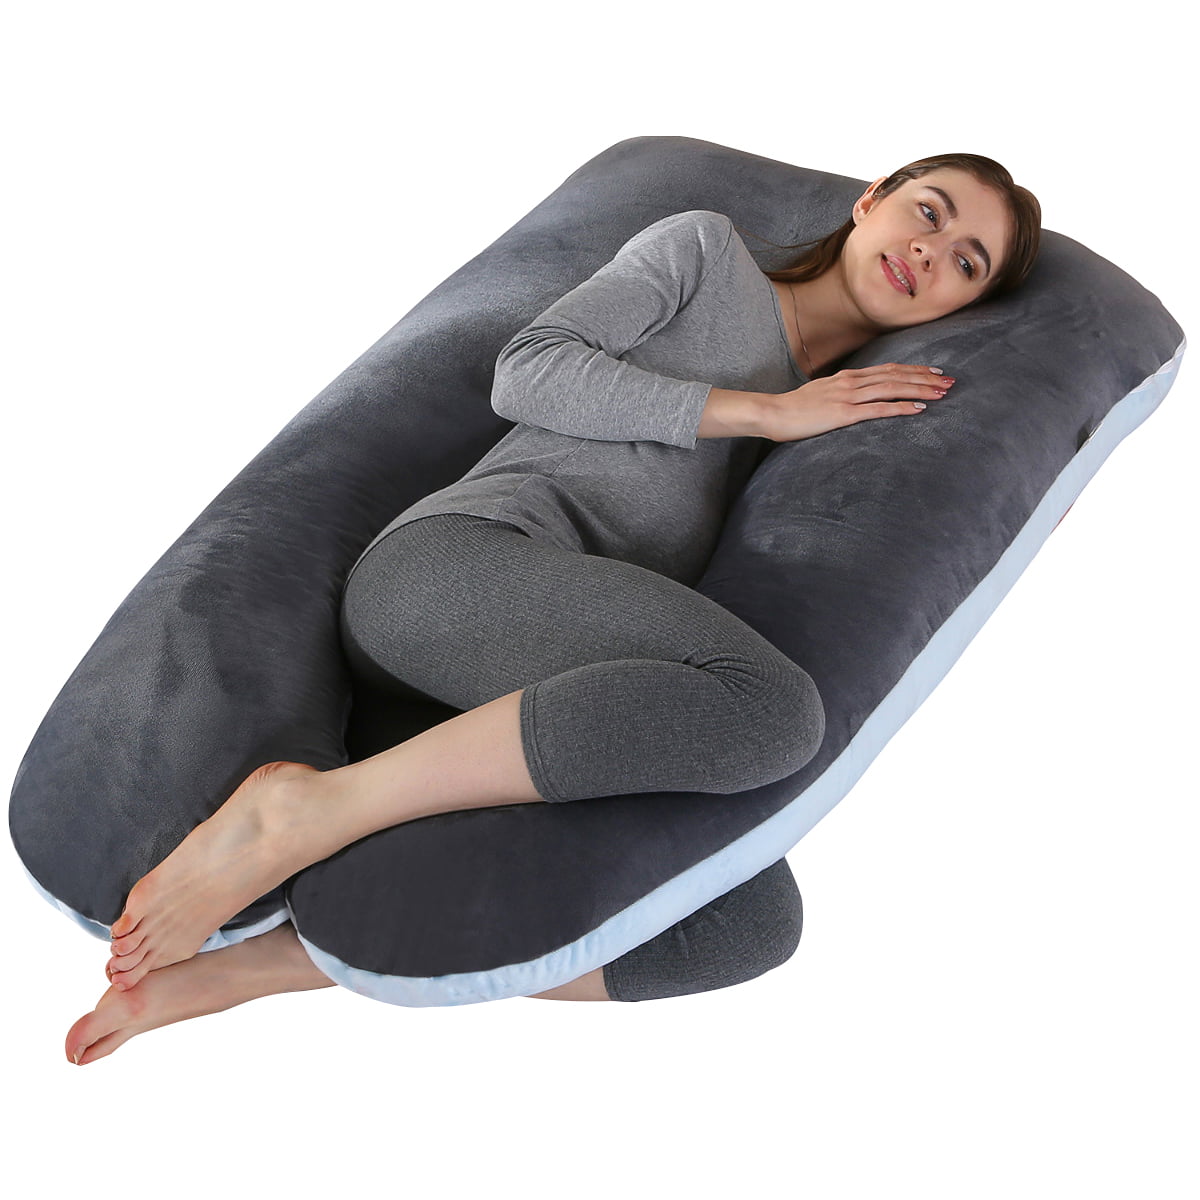 Details about   U Shape Pregnancy Pillow Full Body Pillow for Maternity Pregnant Women-Gray 